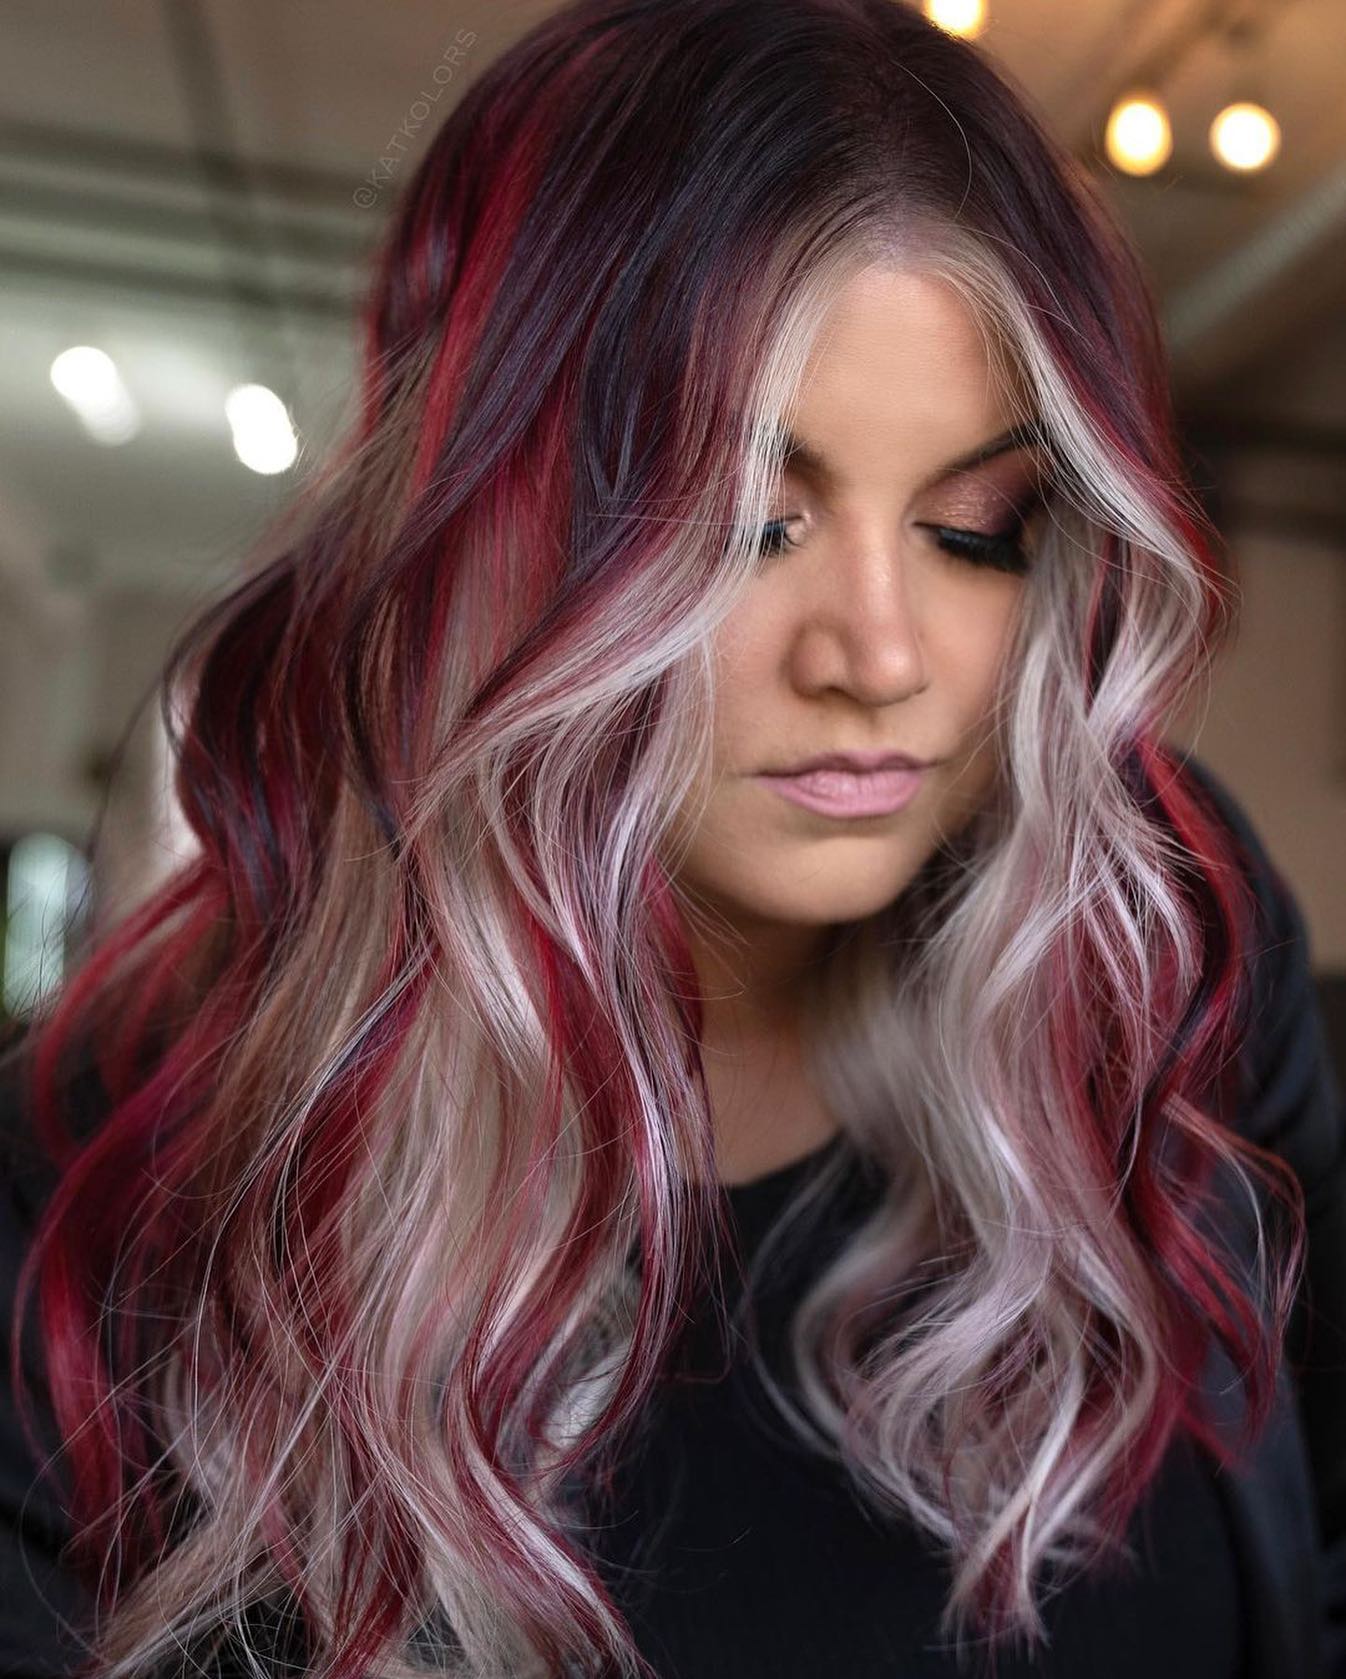 100+ Best Colorful Hair Ideas images 25